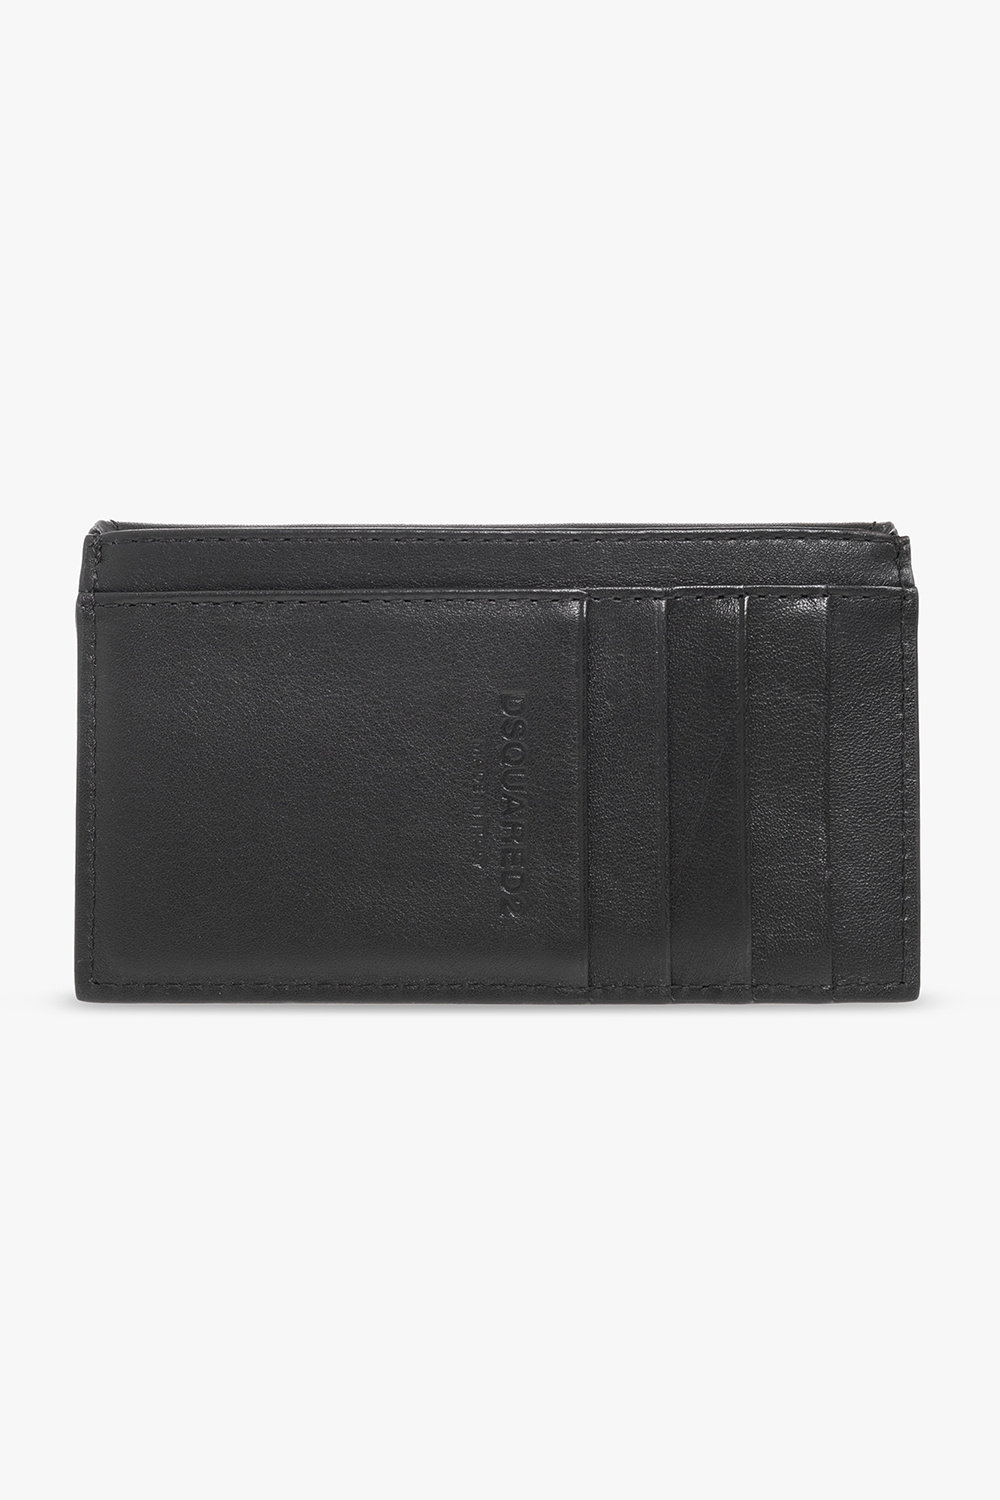 Dsquared2 Leather card case